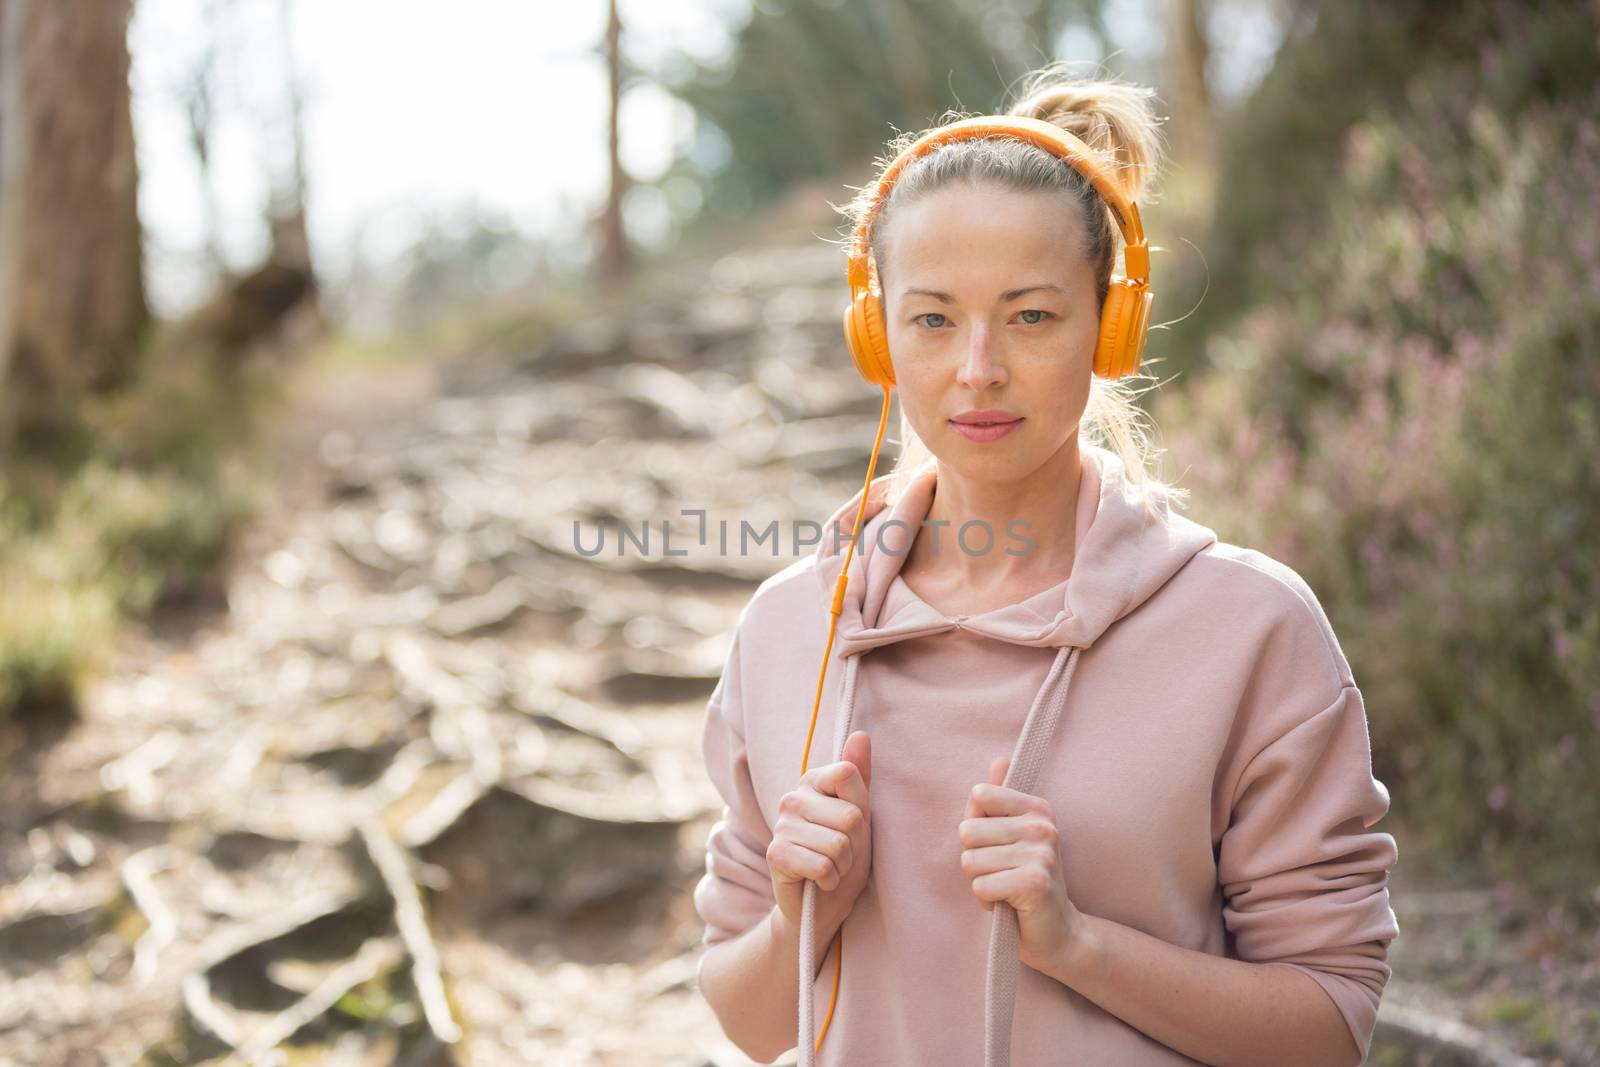 Portrait of beautiful sports woman with hoodie and headphones during outdoors training session. Healthy lifestyle image of young caucasian woman jogging outside.